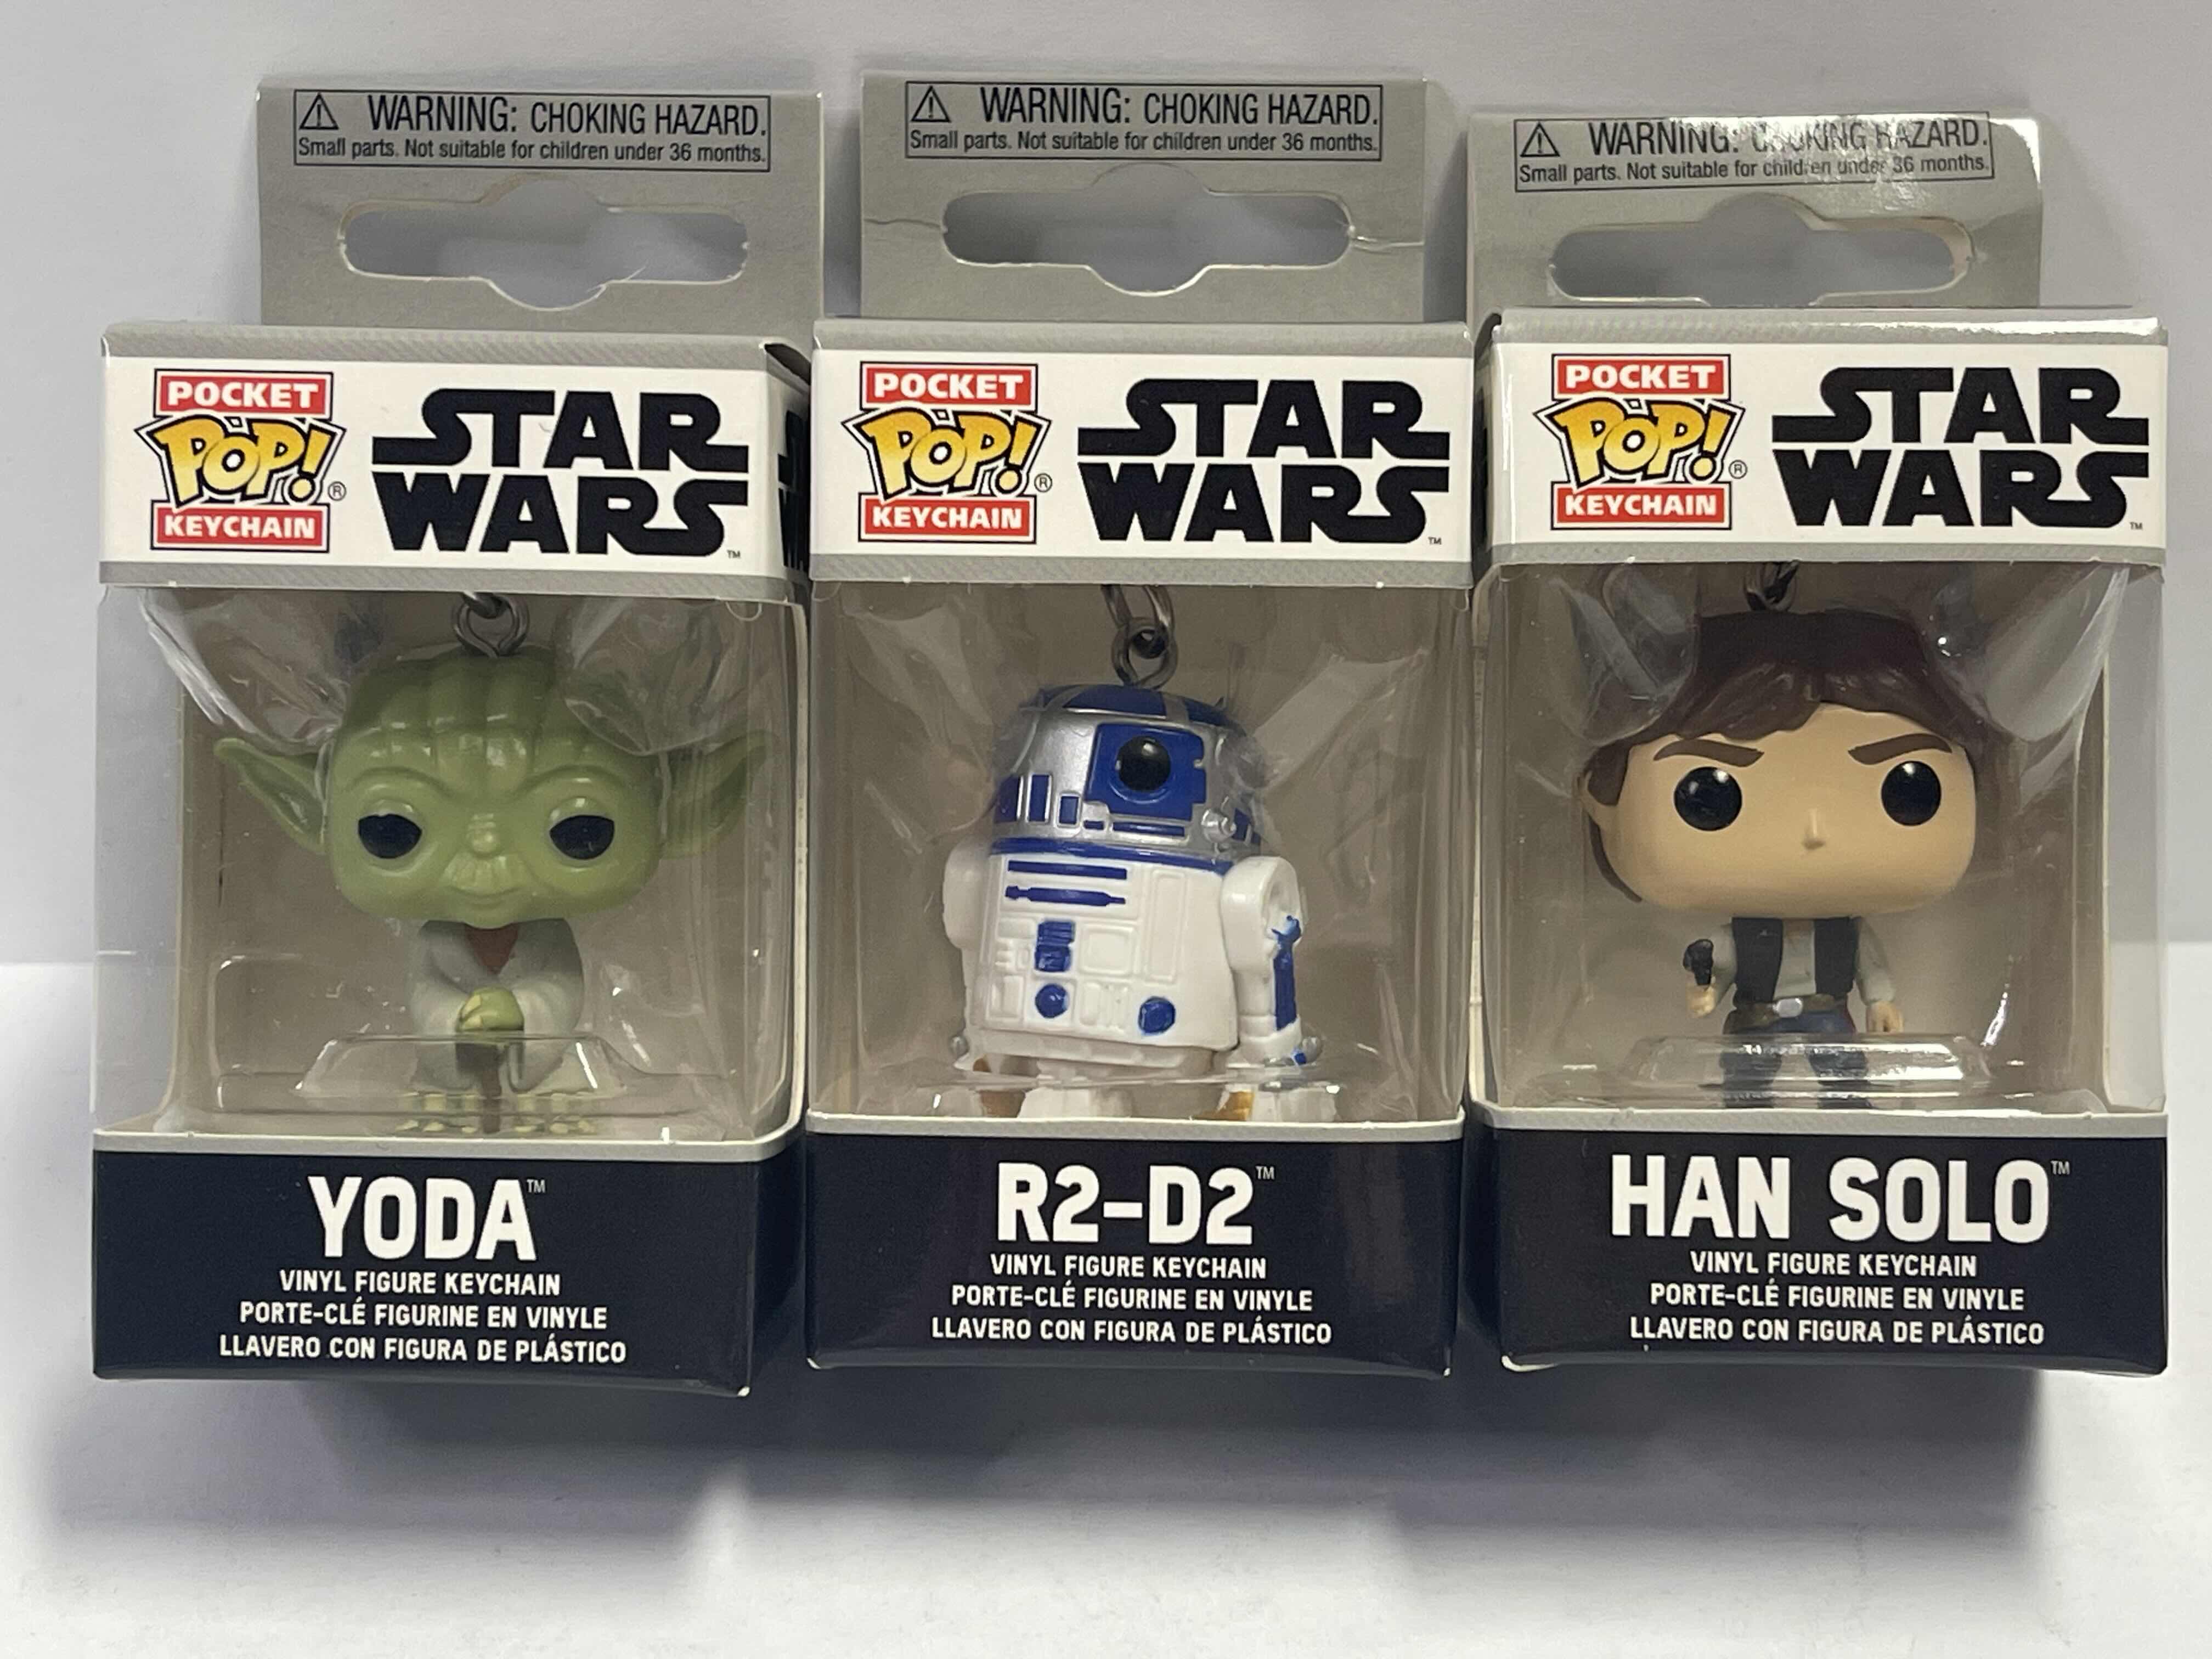 Photo 1 of NEW 3 POCKET POP KEYCHAINS “STAR WARS “ - HAN SOLO , R2-D2 & YODA - TOTAL RETAIL PRICE $ 32.00